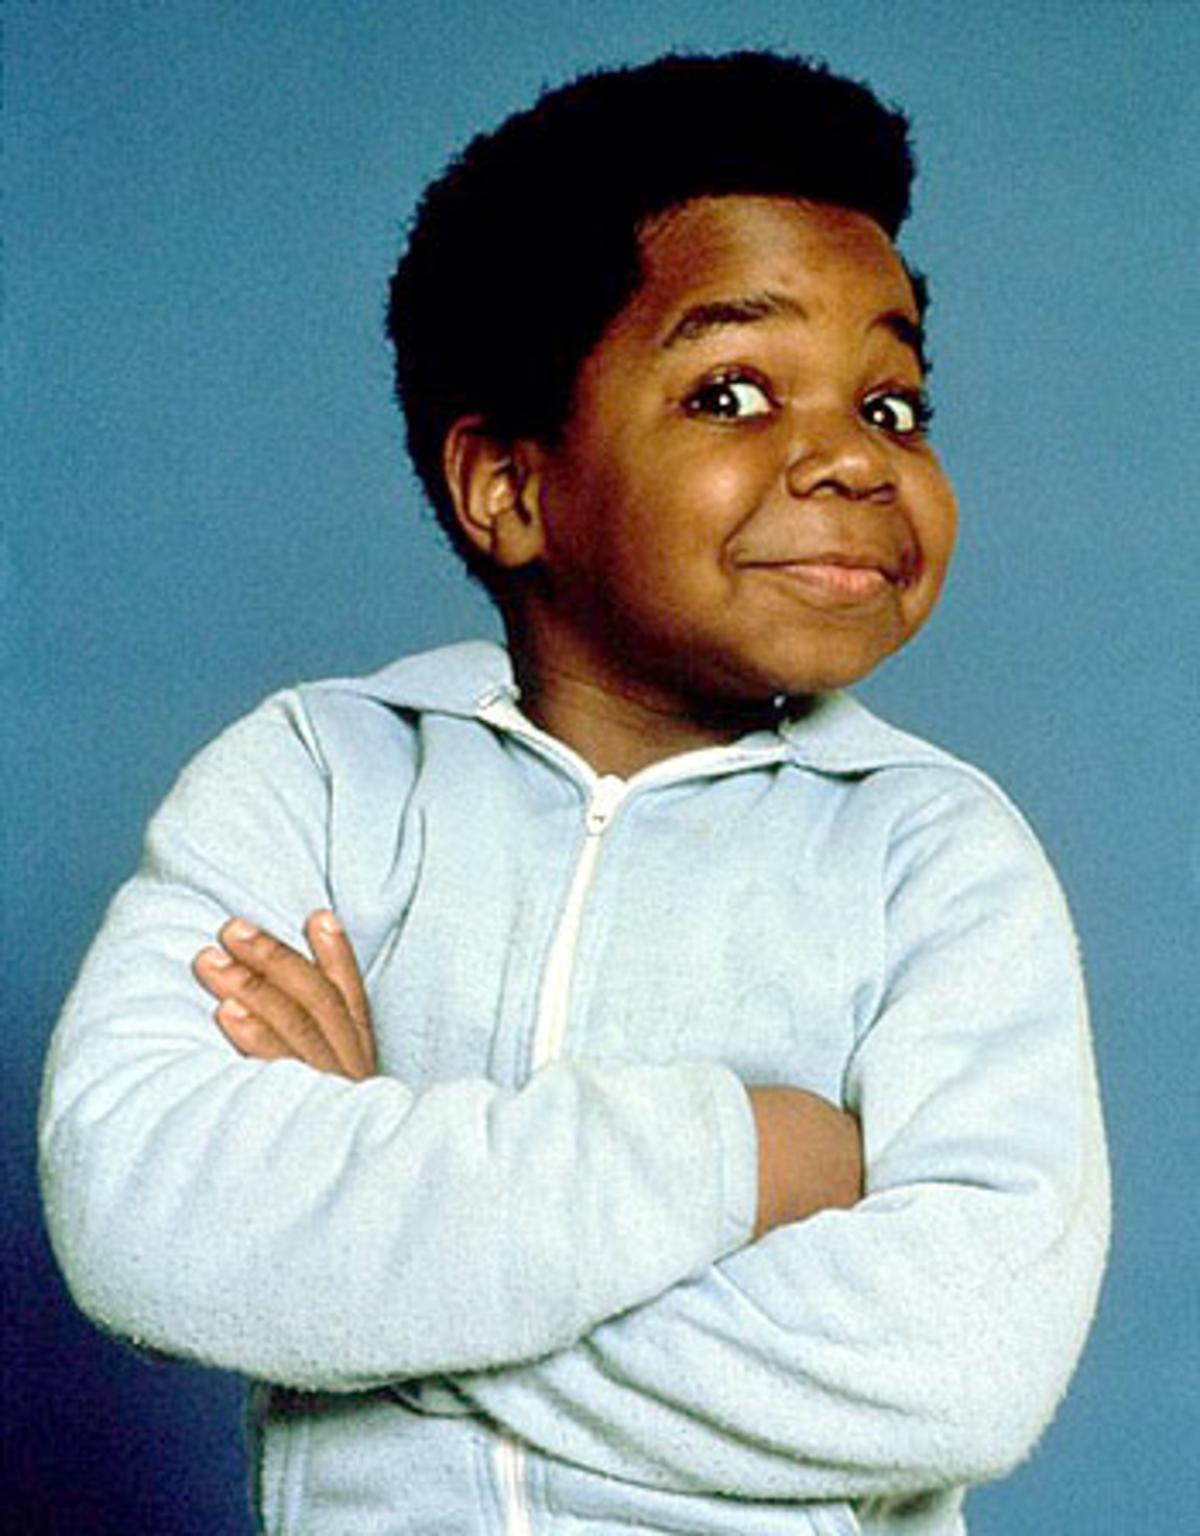 Gary Coleman earned millions when he was young, but then his family and manager ruined him - they've spent most of his 8 million dollar fortune and he had to file for bankruptcy.